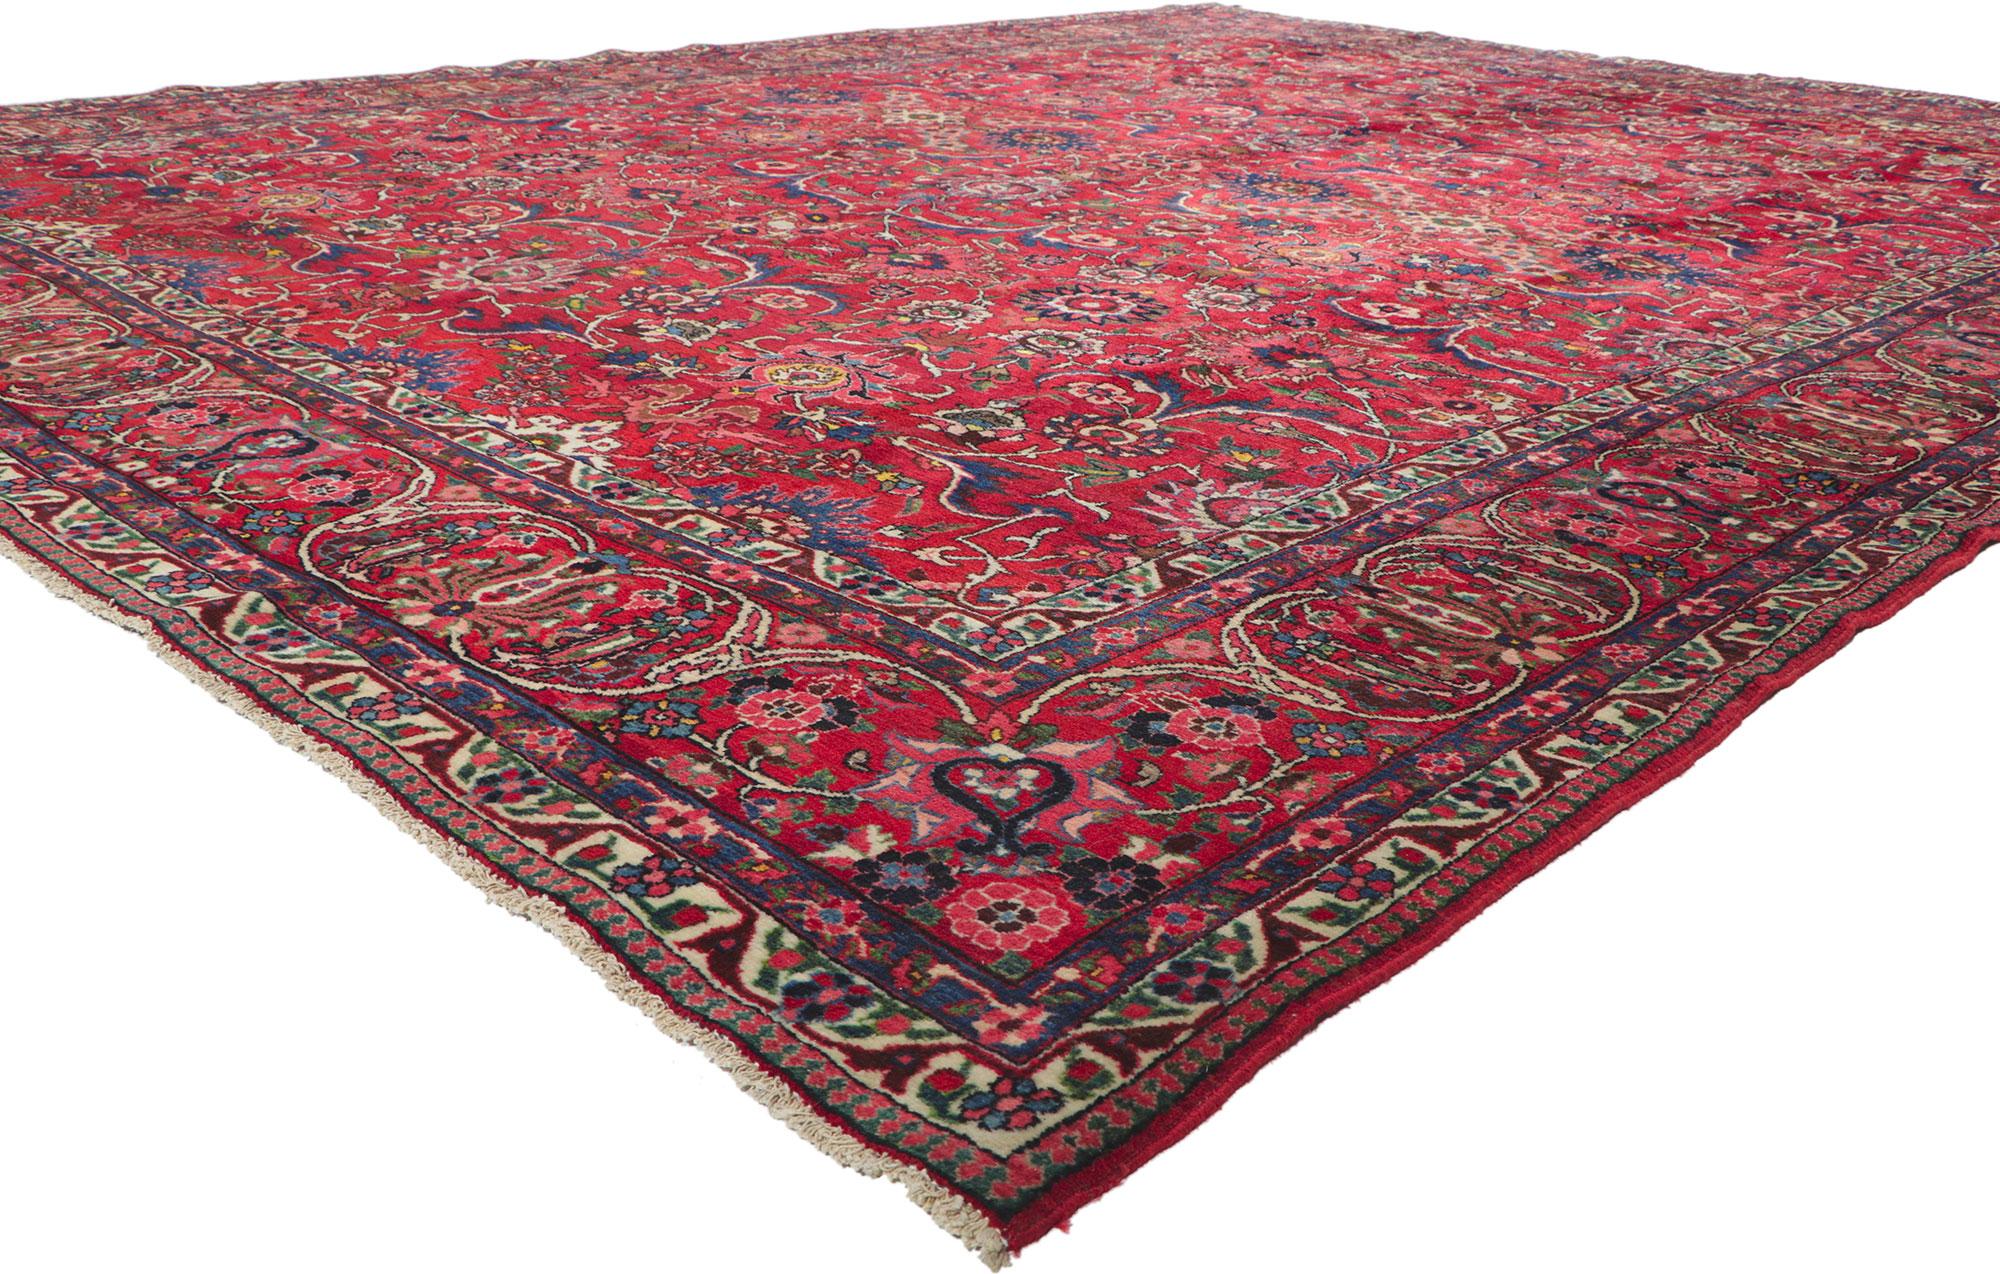 61109 Antique Persian Bakhtiari Rug, 10'09 x 13'09.
With its timeless style, incredible detail and texture, this hand knotted wool antique Persian Bakhtiari rug is a captivating vision of woven beauty. The eye-catching botanical pattern and